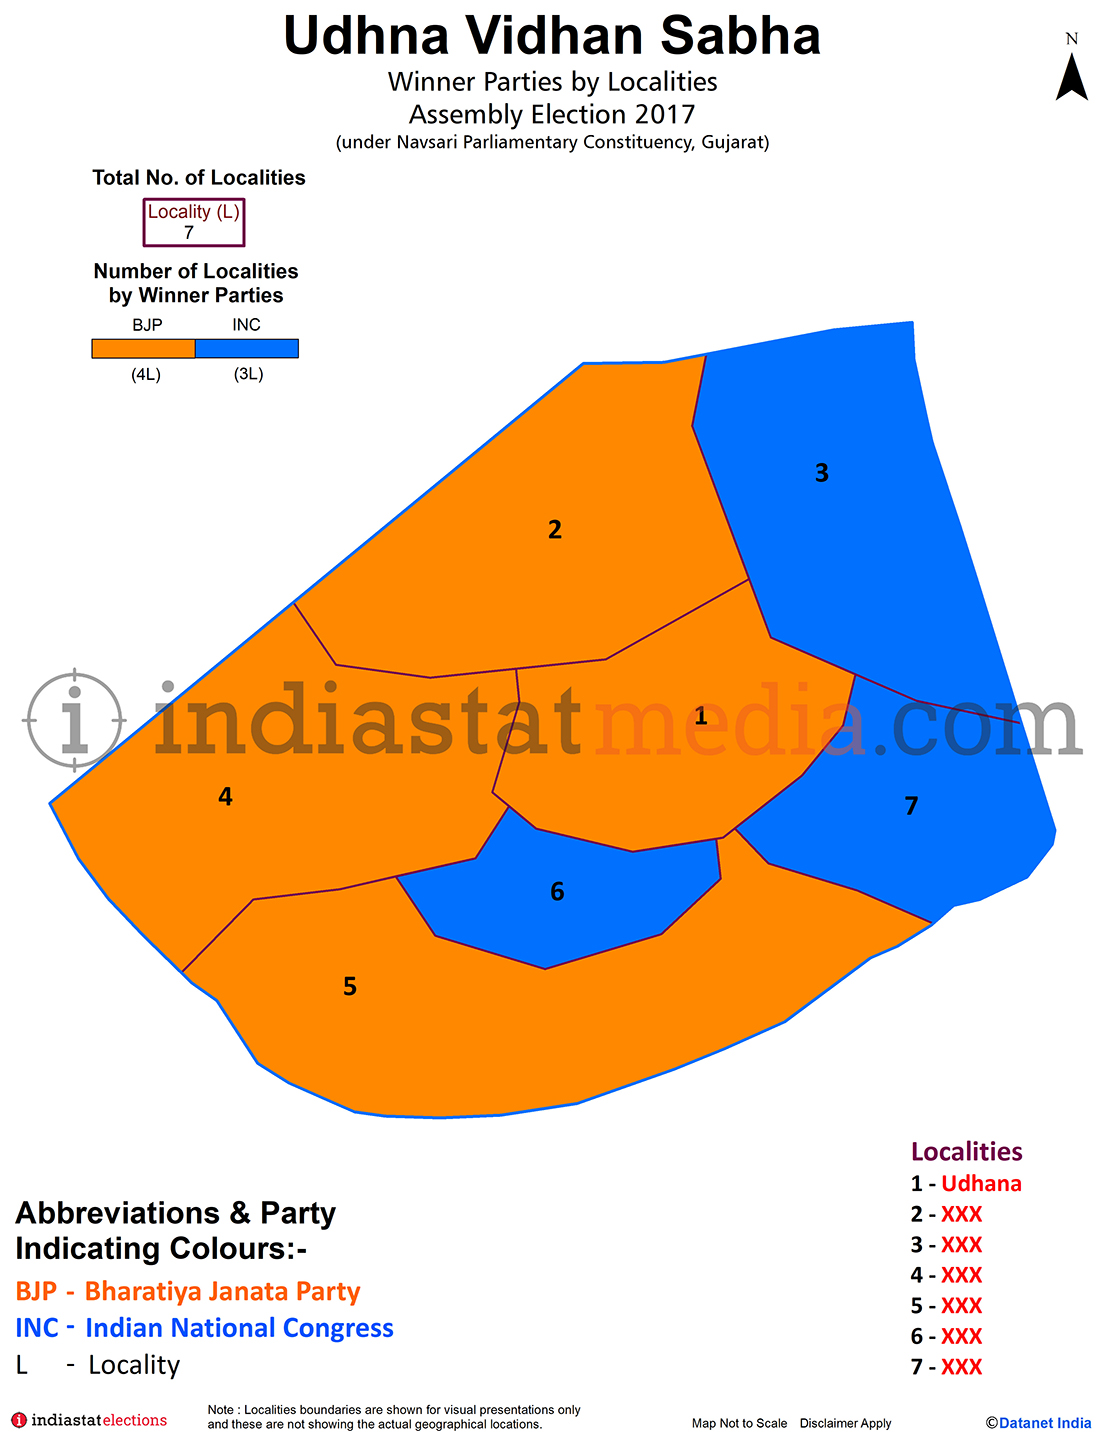 Winner Parties by Localities in Udhna Assembly Constituency under Navsari Parliamentary Constituency in Gujarat (Assembly Election - 2017)